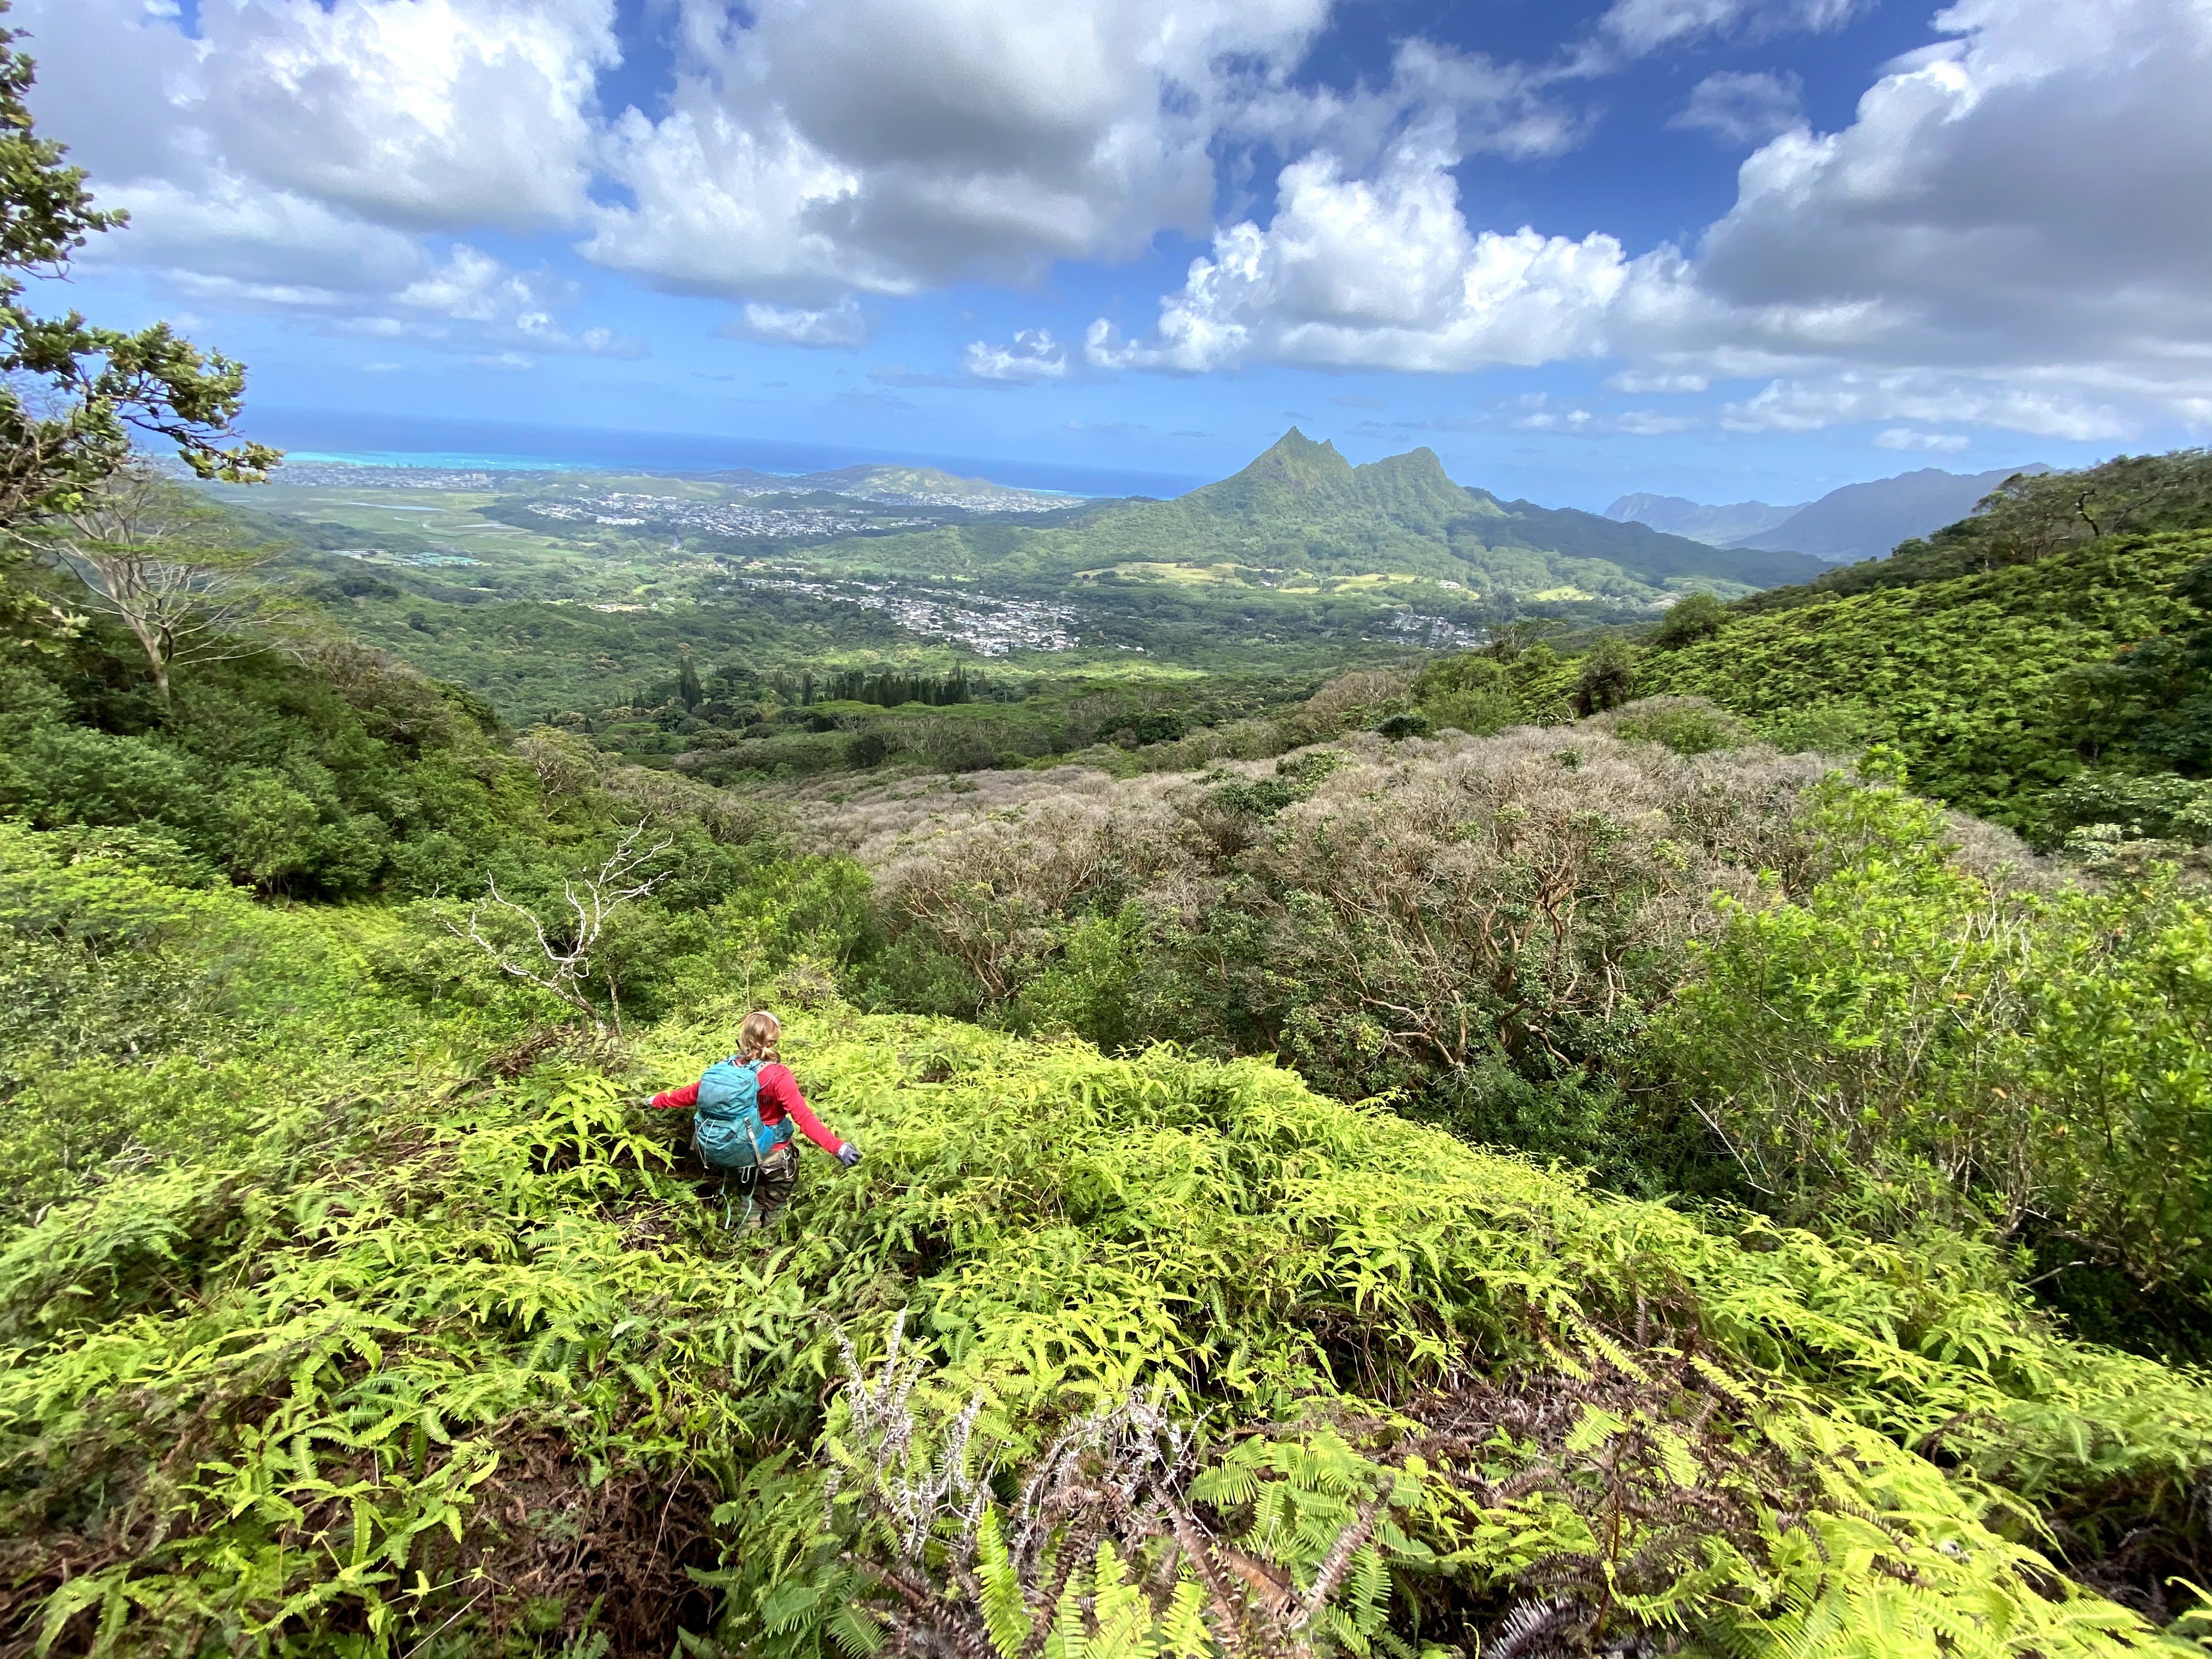 Overlooking Olomana (“three peaks”) on the east side of Oahu, Hawaii during a field survey for incipient invasive species.